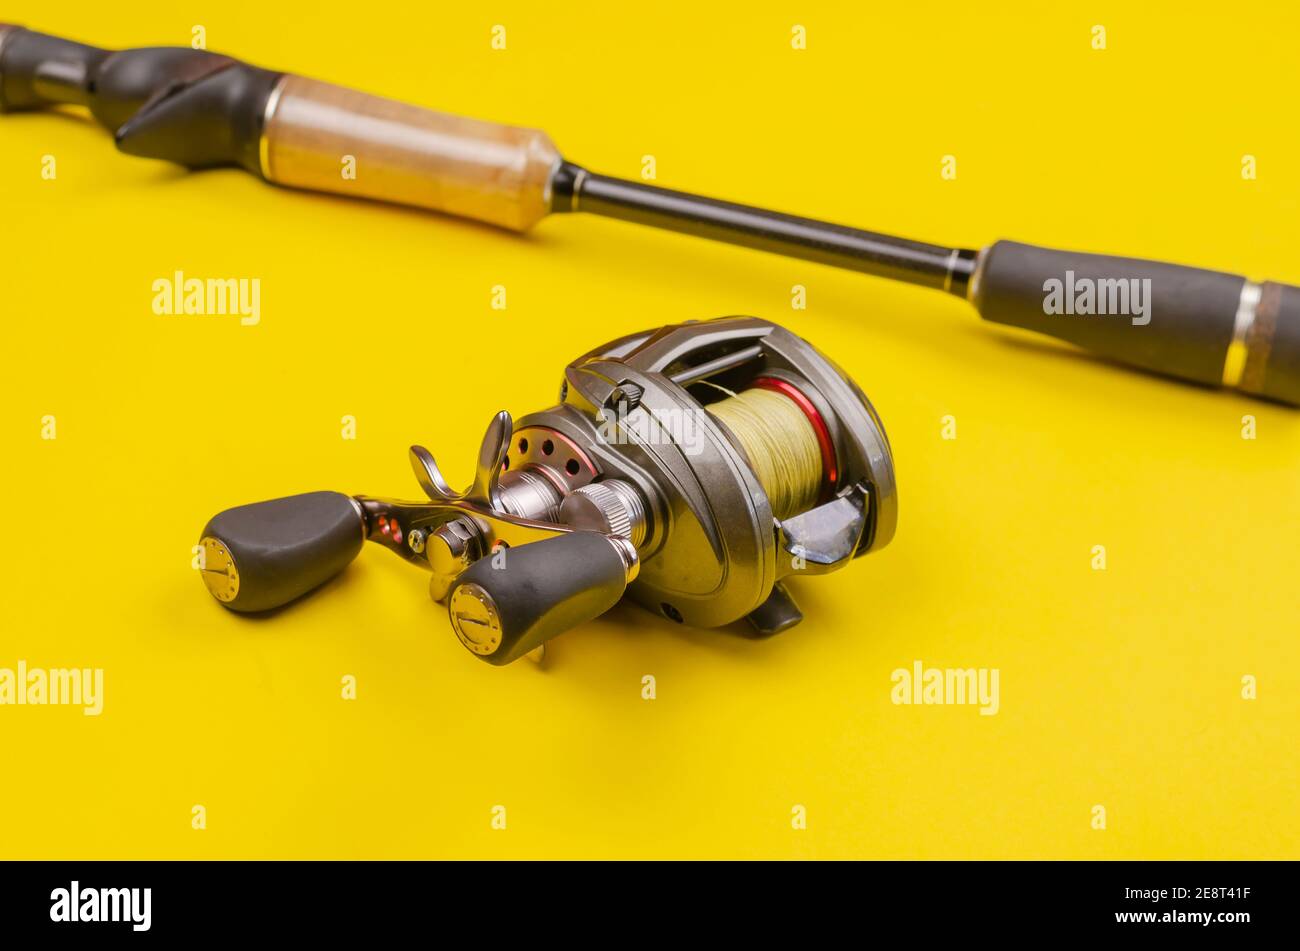 Fishing rod and reel on a yellow background. Casting rod with a